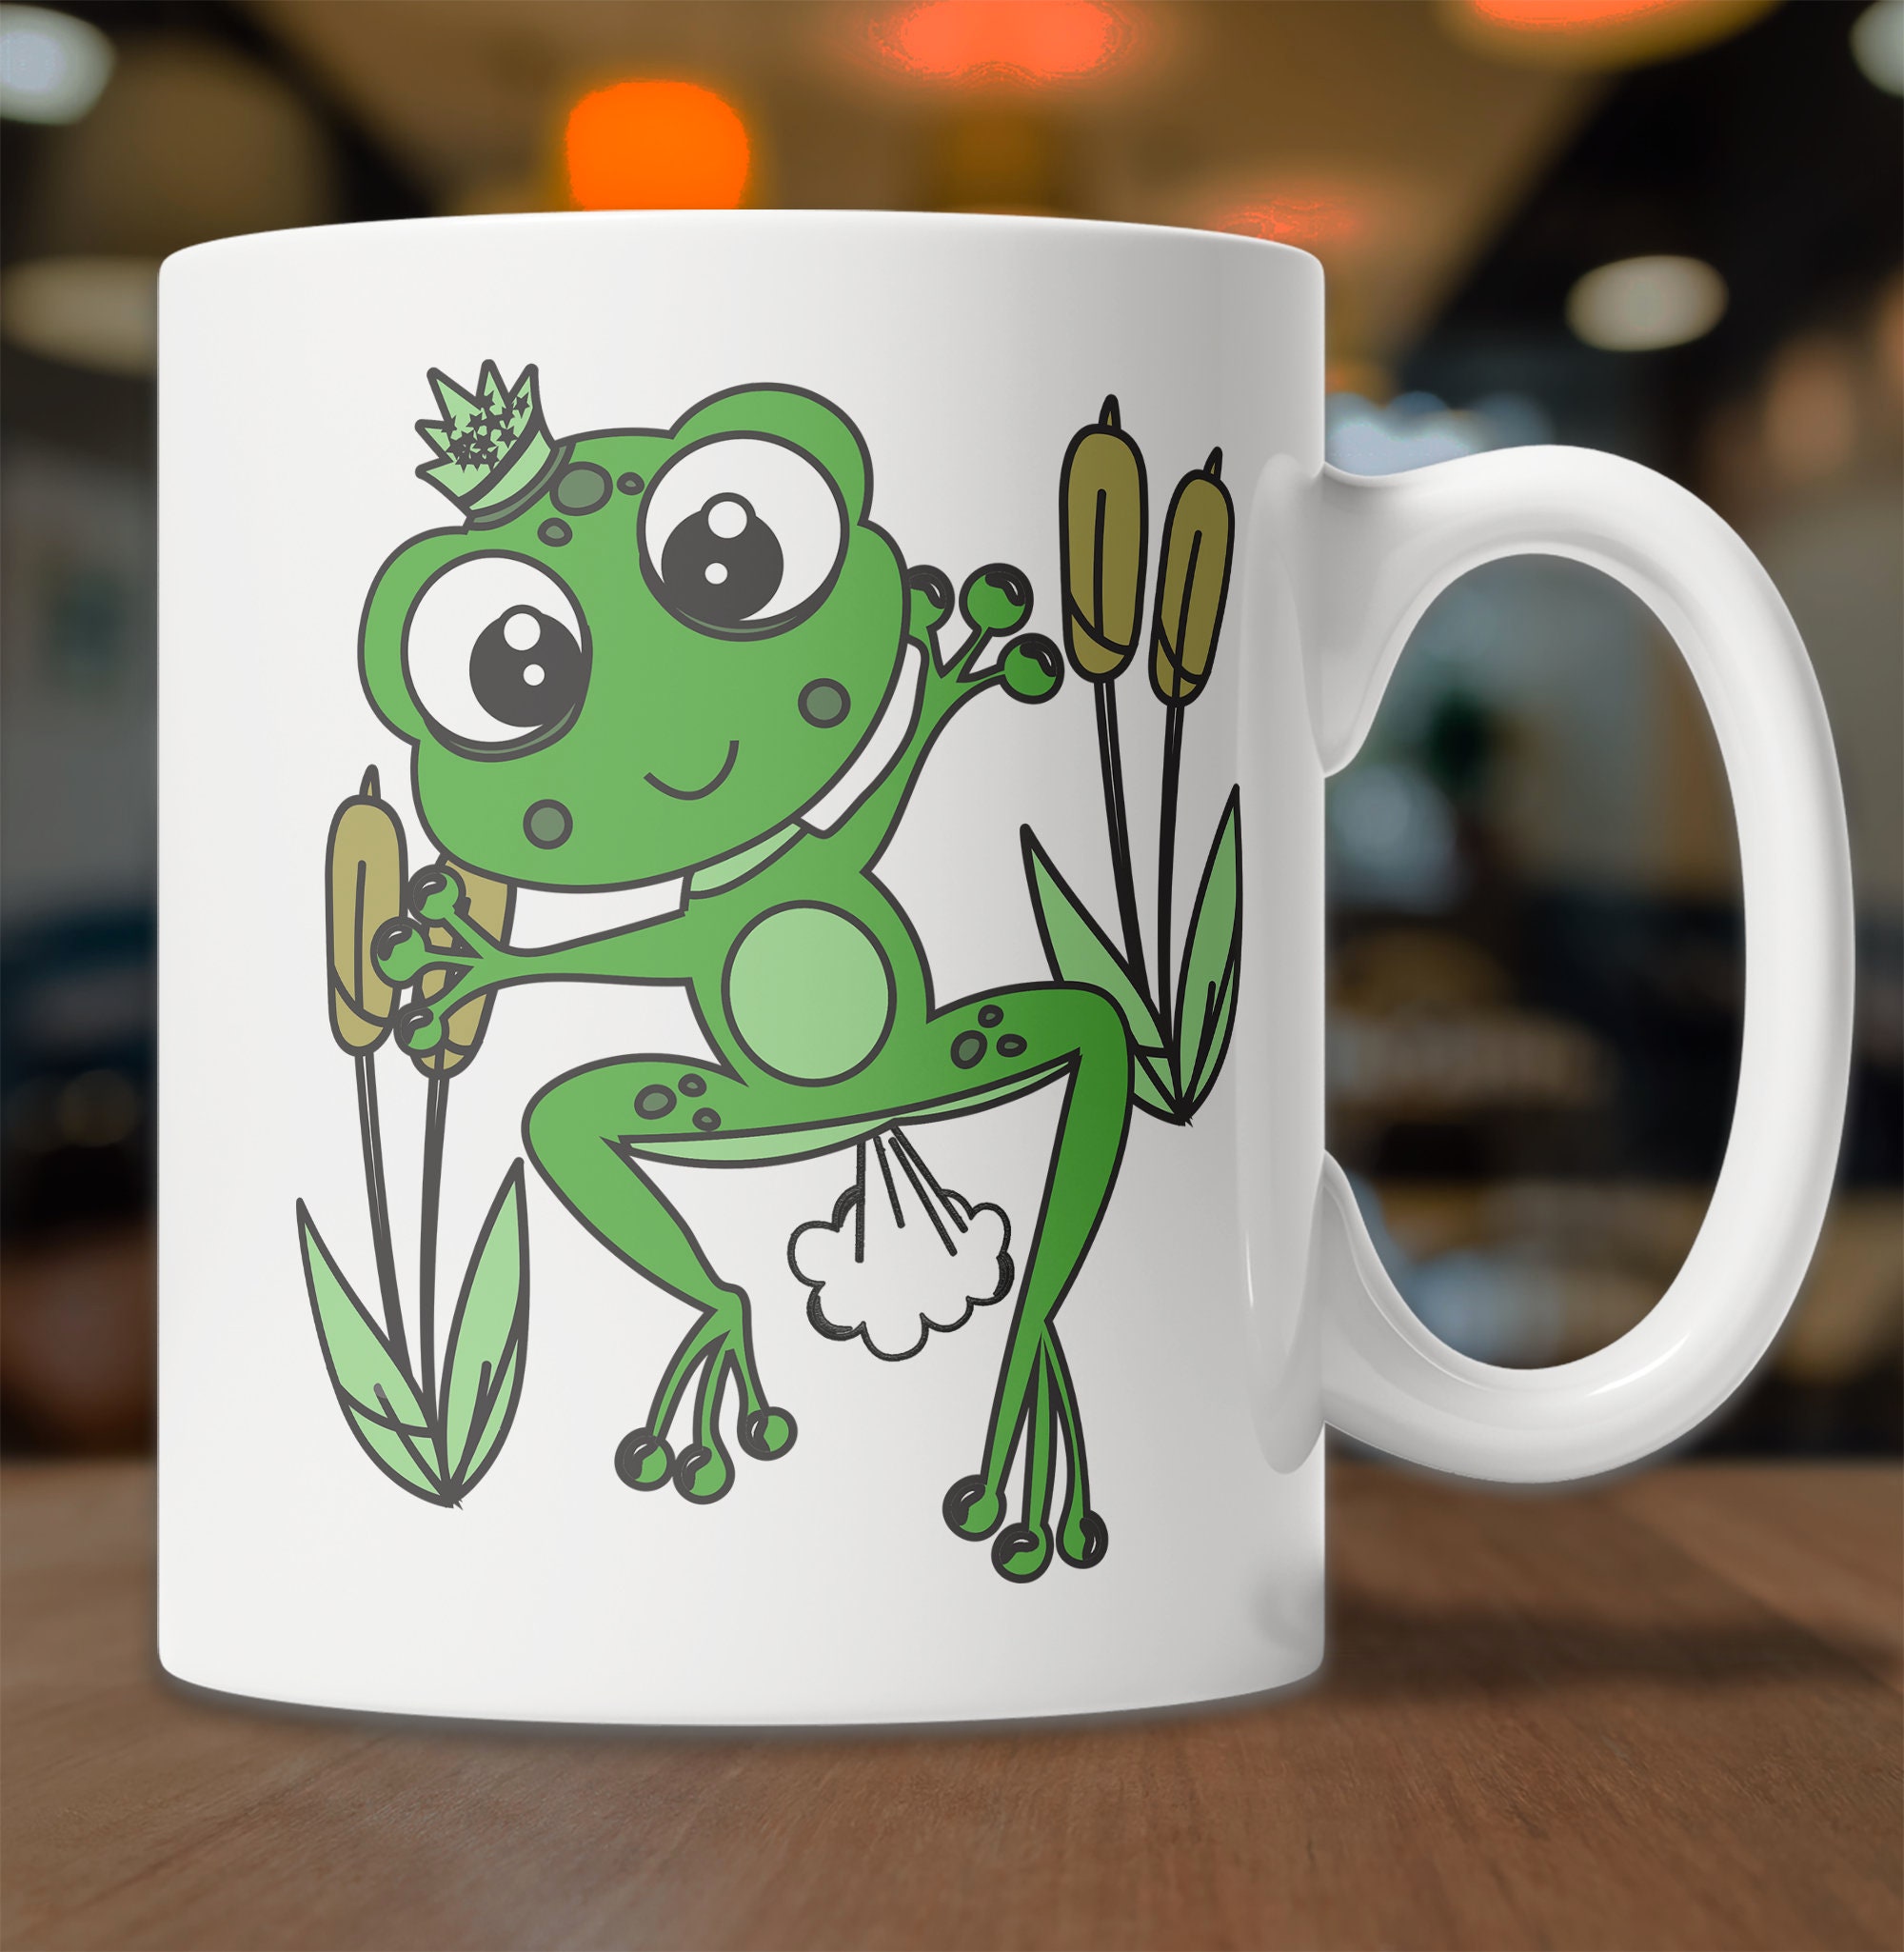 Athenstics Frog Tumbler Cute Drinking Cup 20oz Lets Be Honest I Was Crazy  Before The Frogs Stainless Steel Mug Funny Animal Lover Gifts For Women  Tropical Green Leaves Vaccum Tumblers 